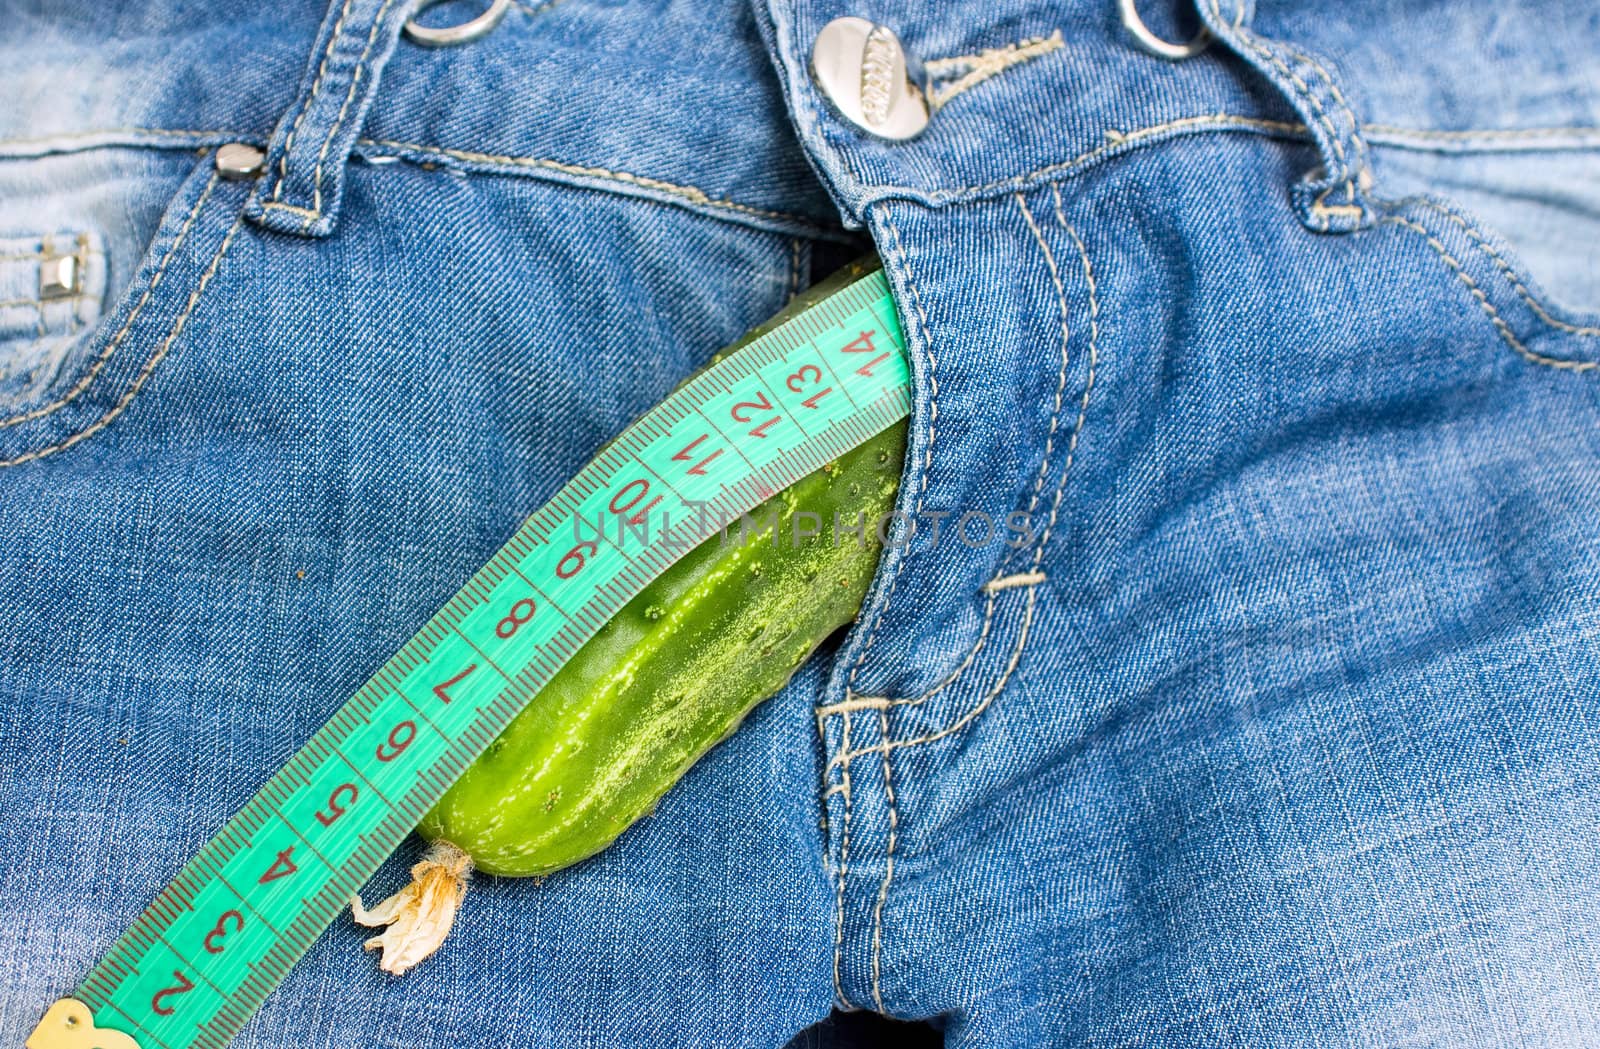 Jeans and cucumber by Bedolaga